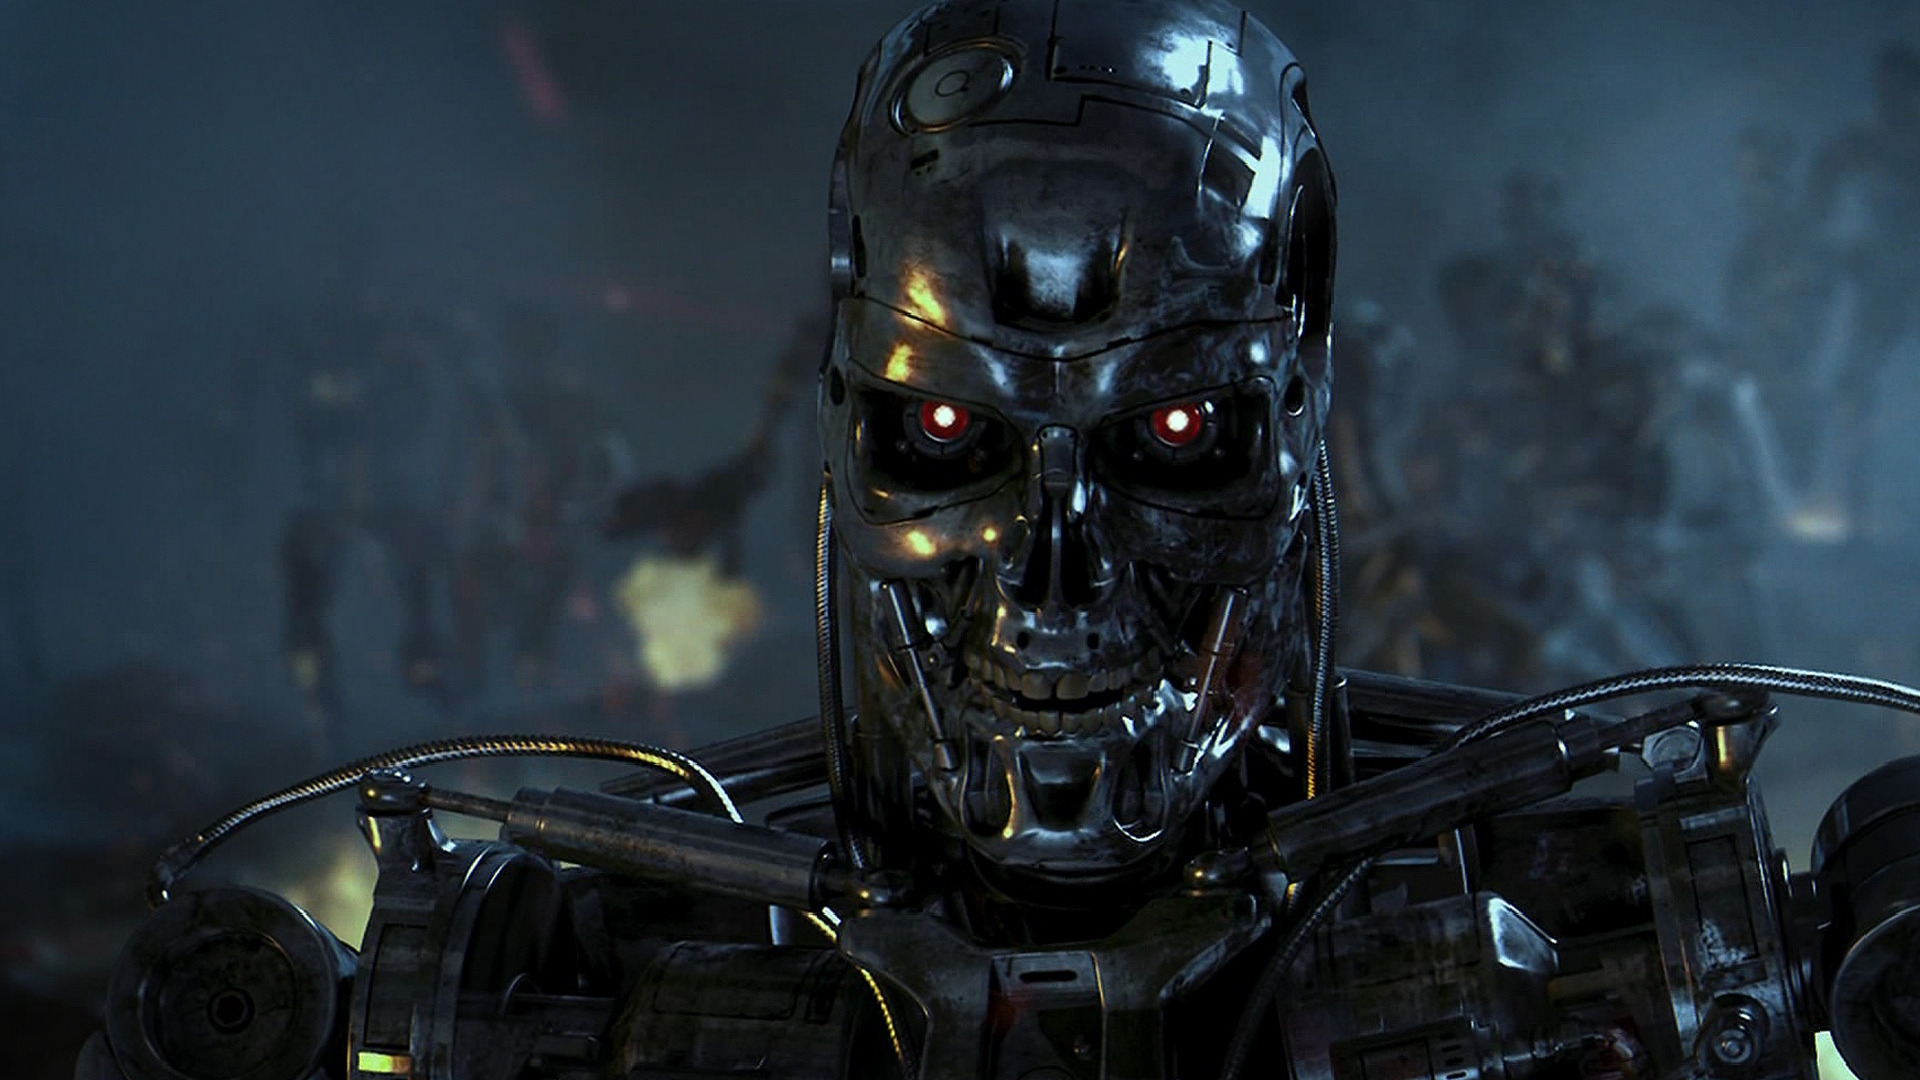 Terminator Rise of the Machines for 1920 x 1080 HDTV 1080p resolution